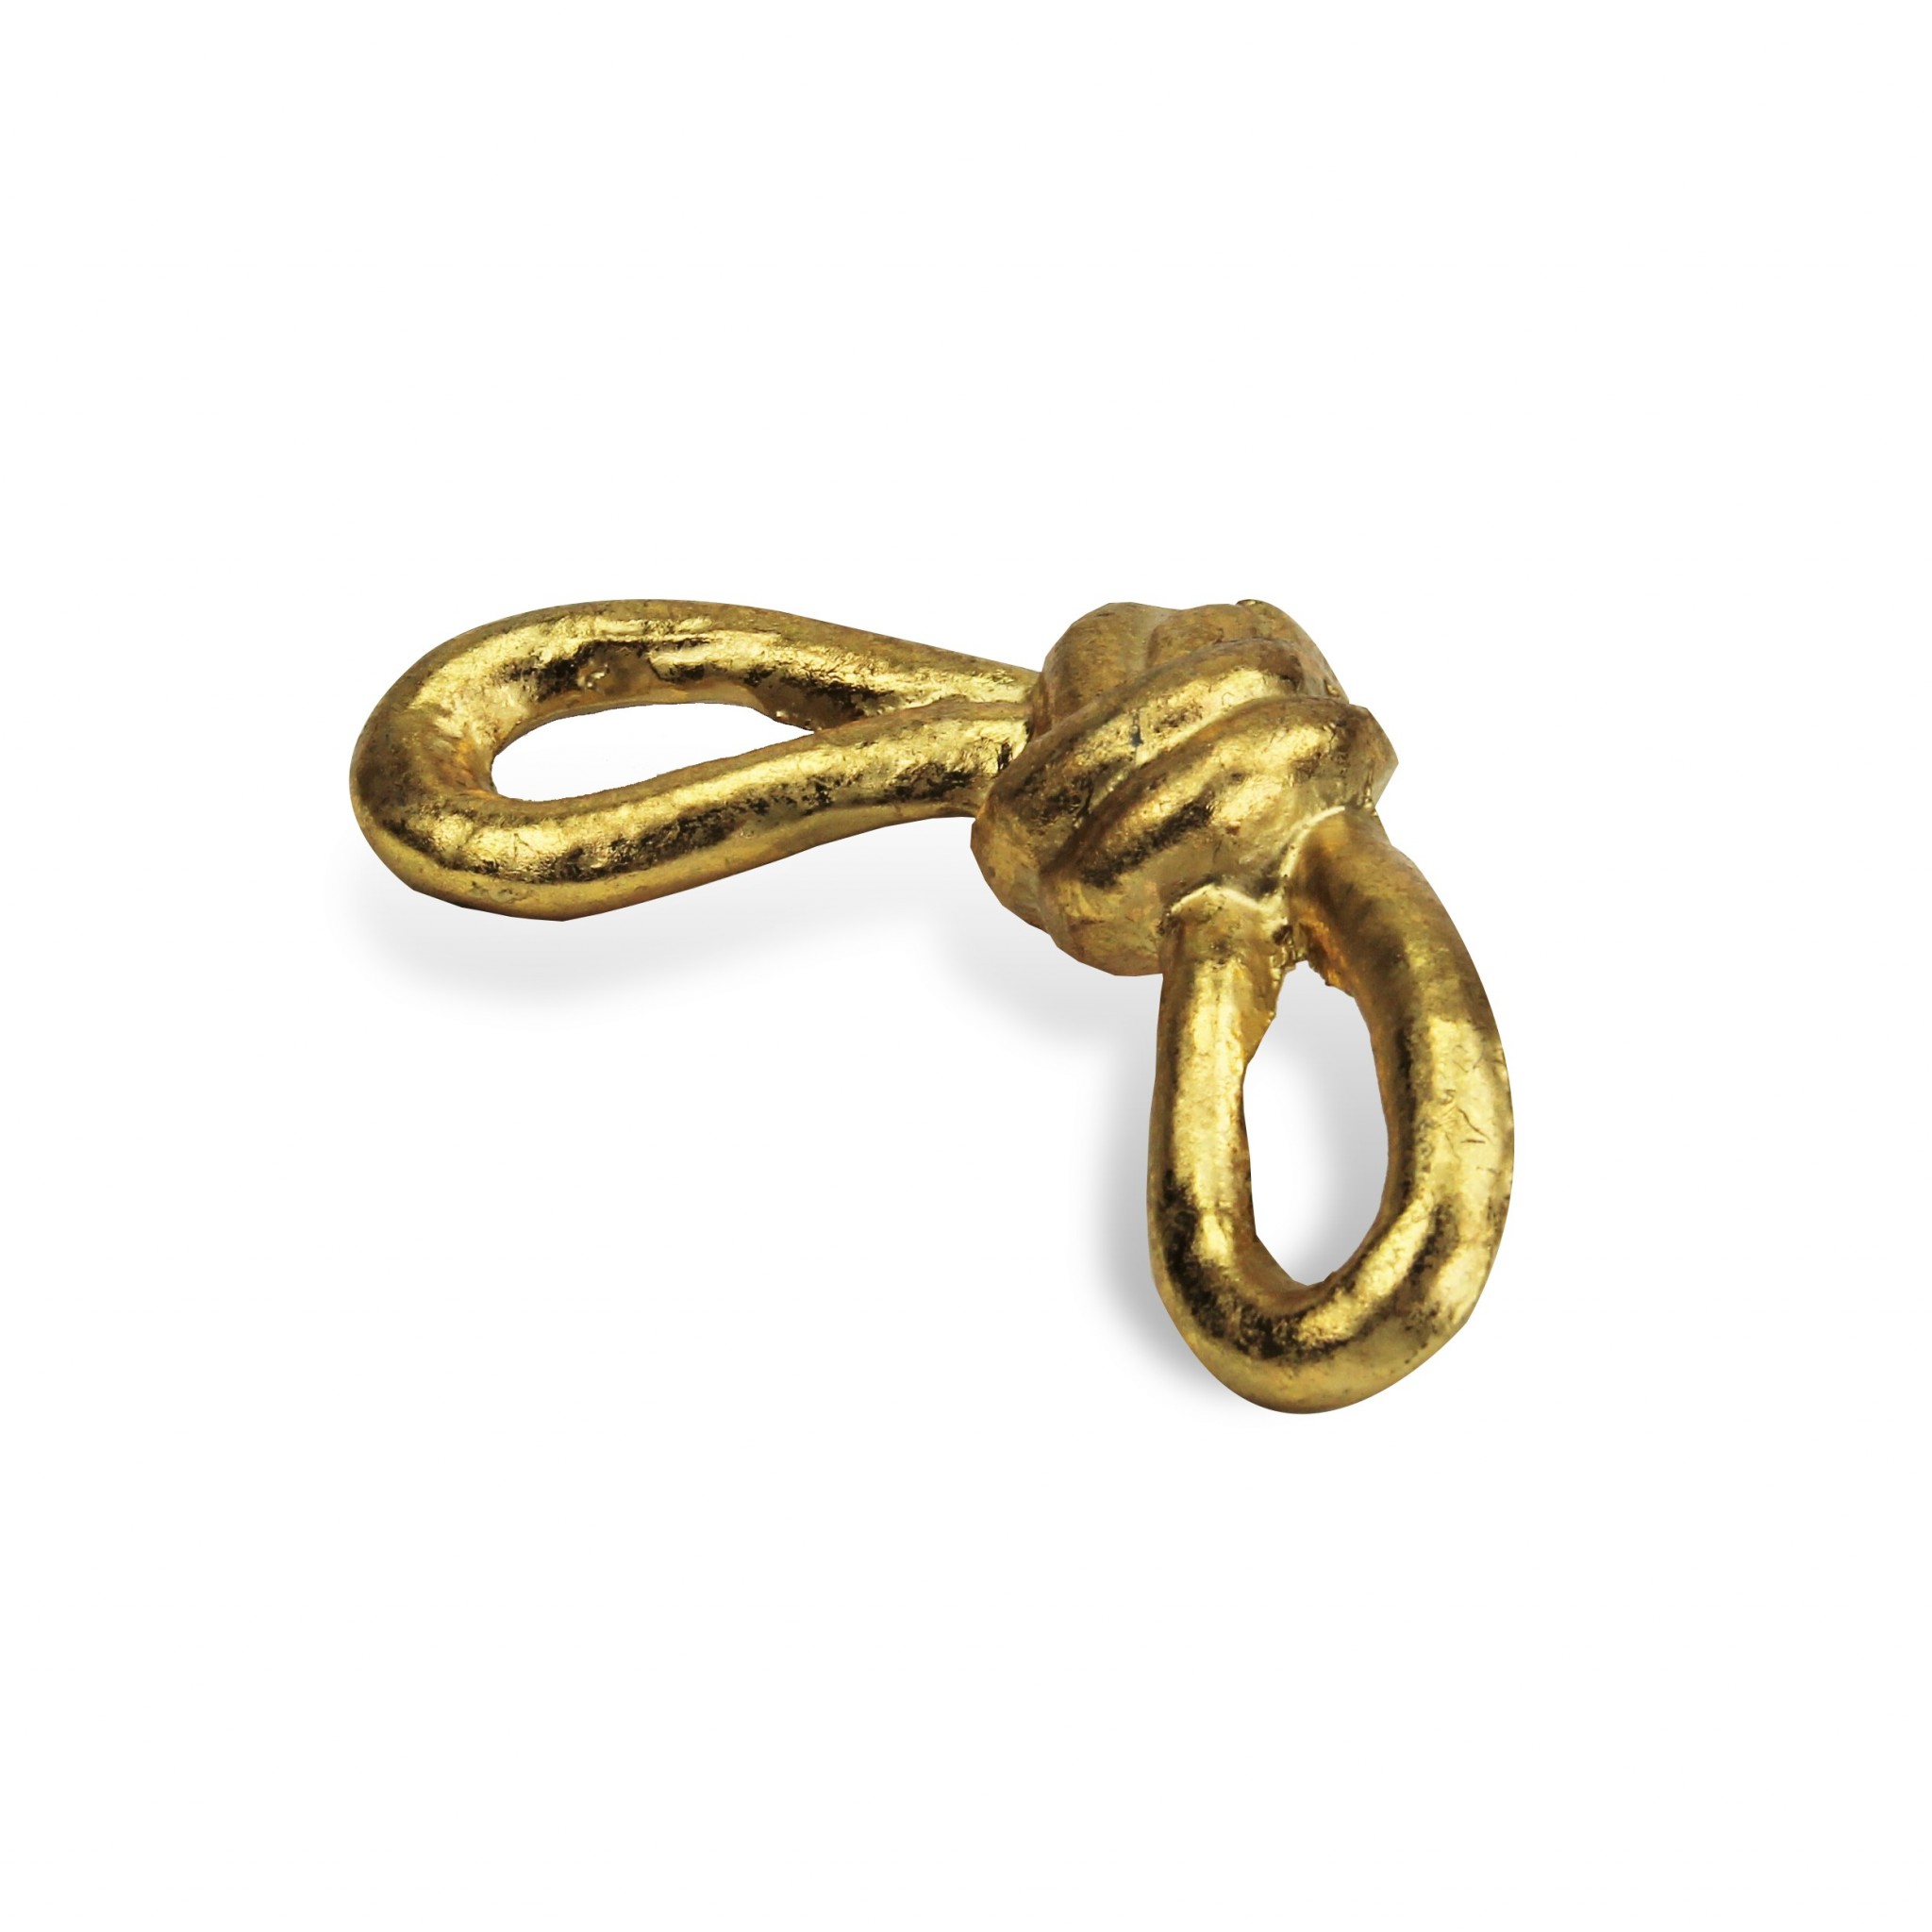 Rustic Gold Cast Iron Knot DTcor